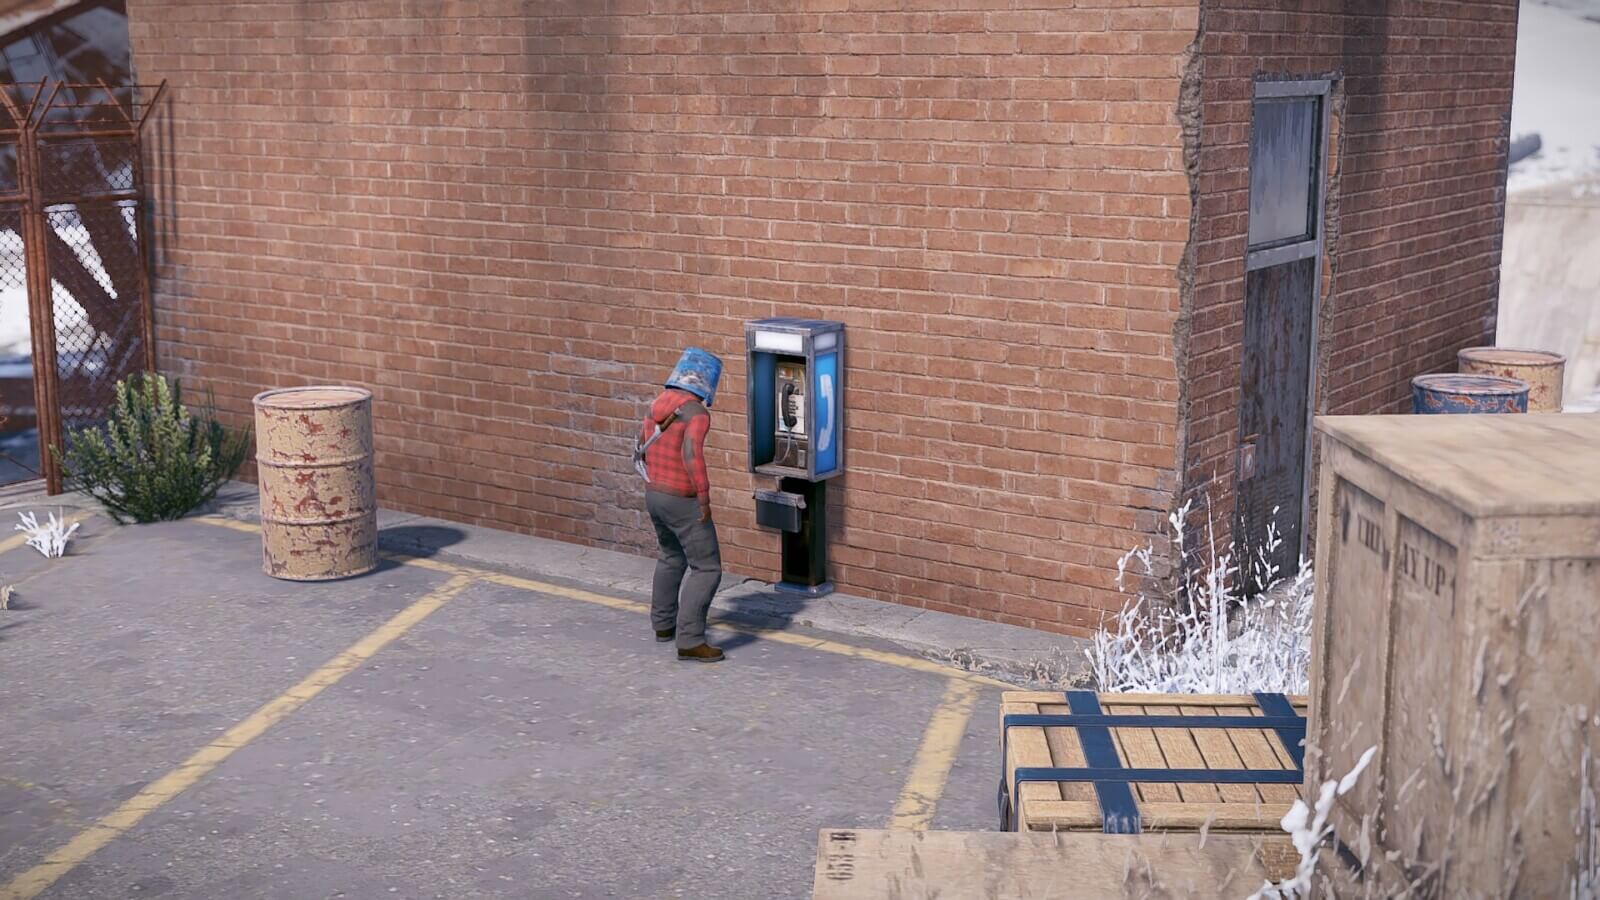 Located next to the single brick structure in the middle of the satellite monument you'll find a telephone. Not entirely useful, but it's there.